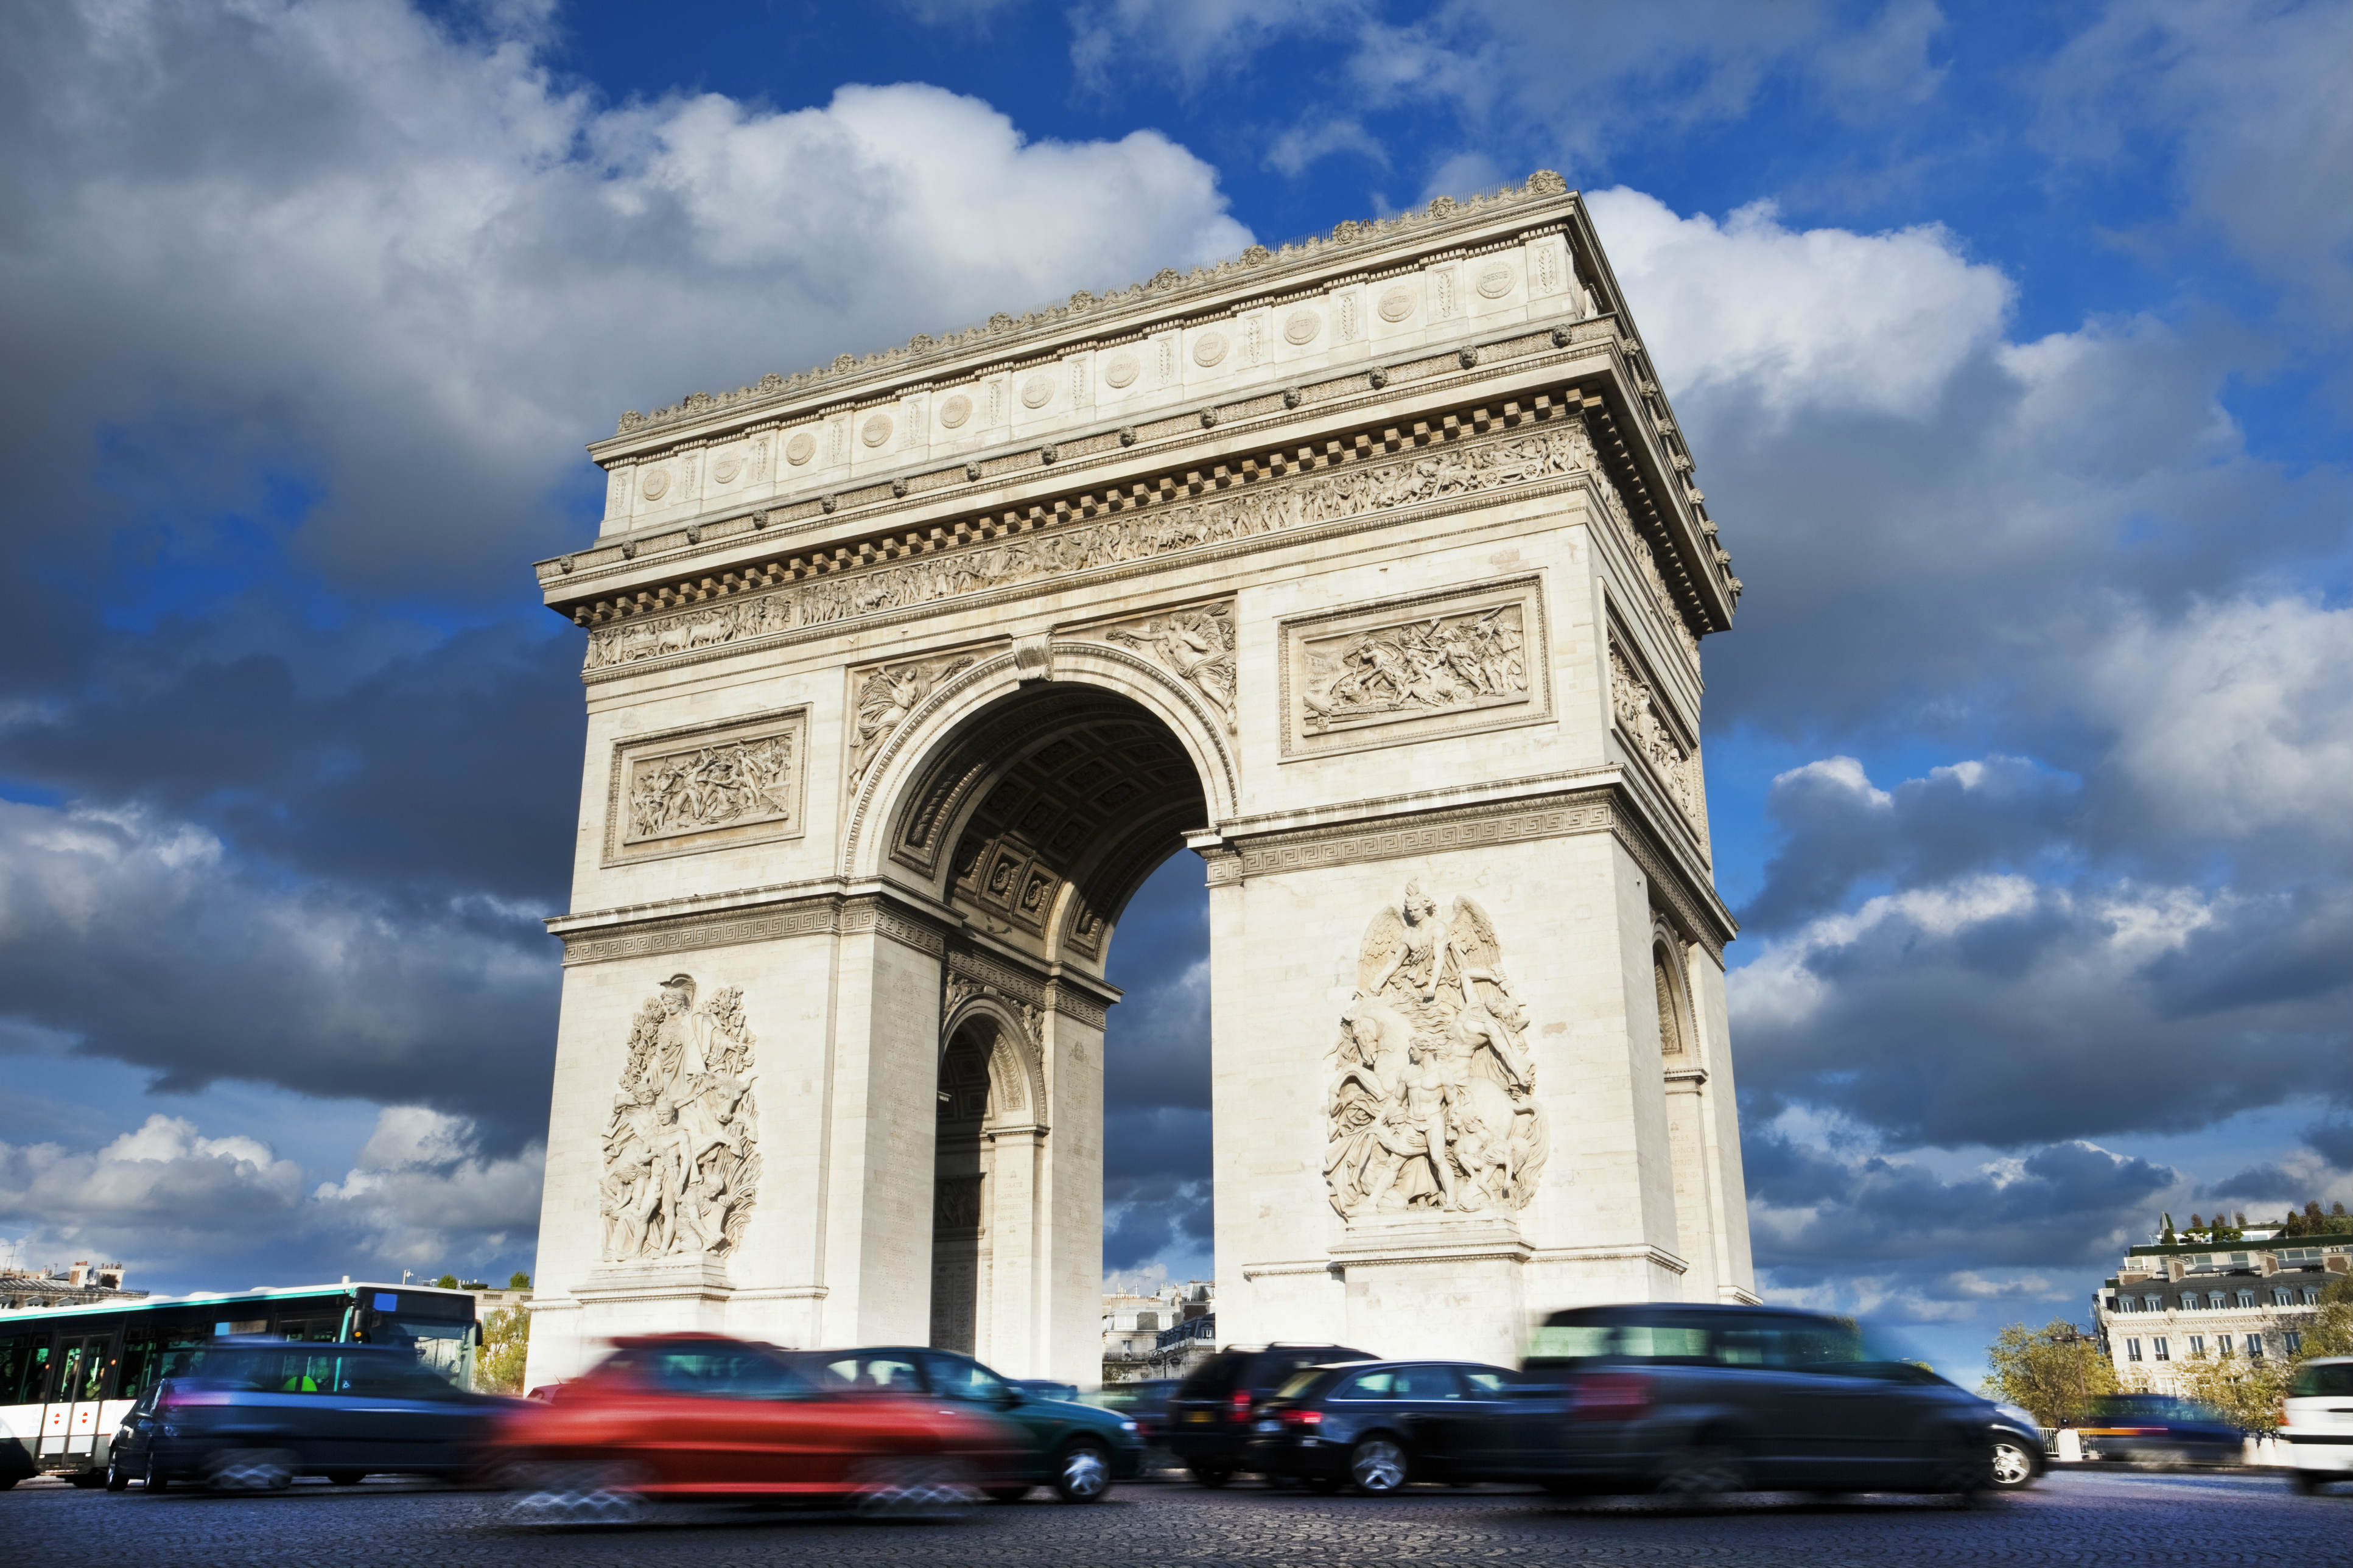 Drivers travelling to France require an emissions sticker to enter Paris, Lyon or Grenoble